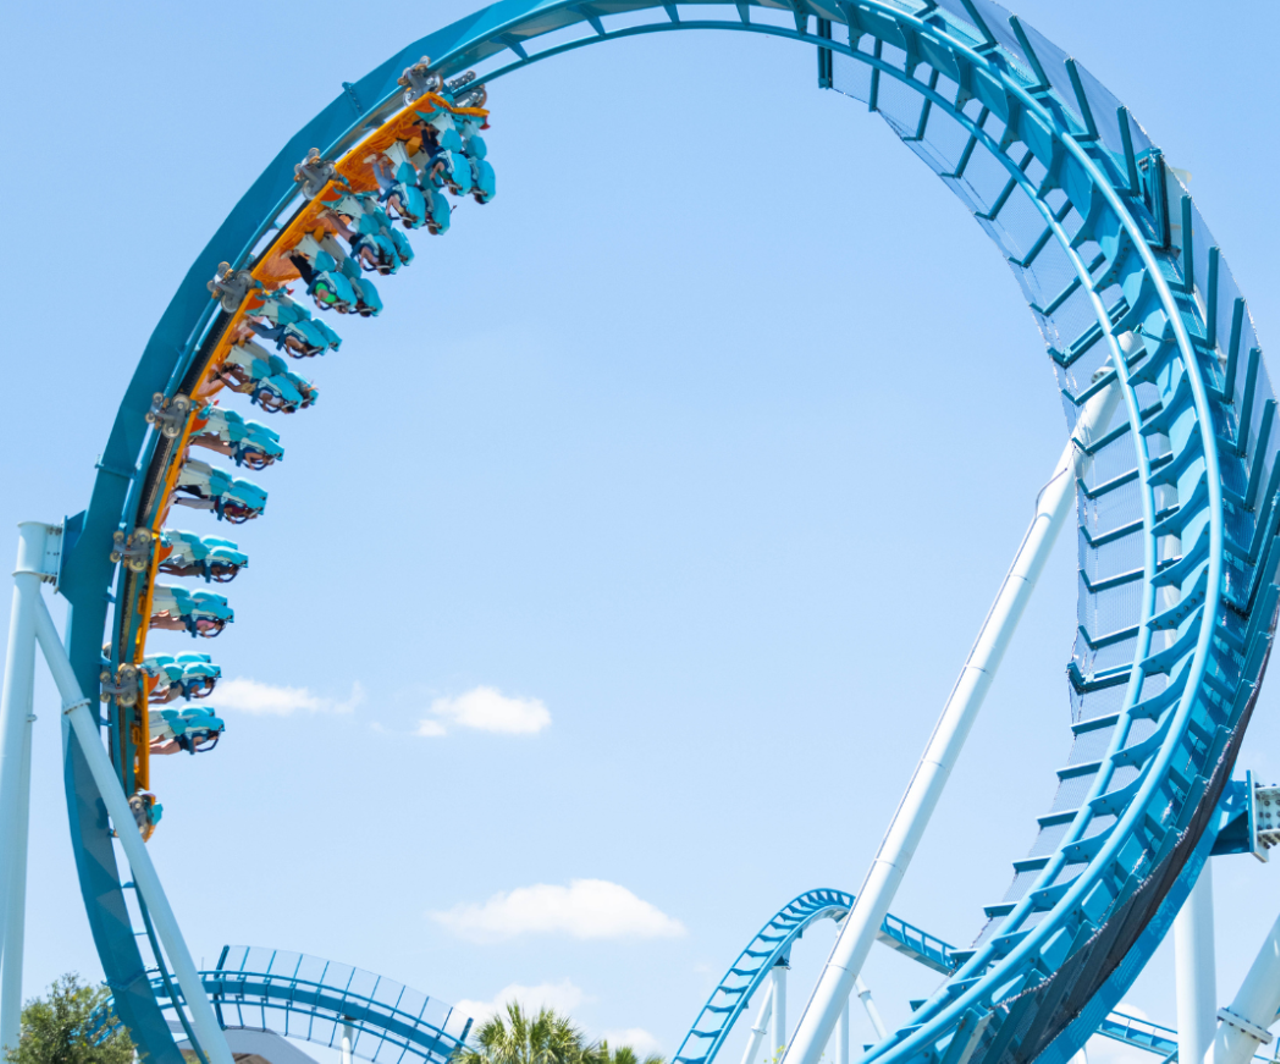 Catch a wave with SeaWorld’s new Pipeline: The Surf Coaster Ride
The park's first and only standing roller coaster opens May 27, to the delight of parkgoers and thrill seekers alike. Be one of the first to catch a wave on this gnarly new attraction.